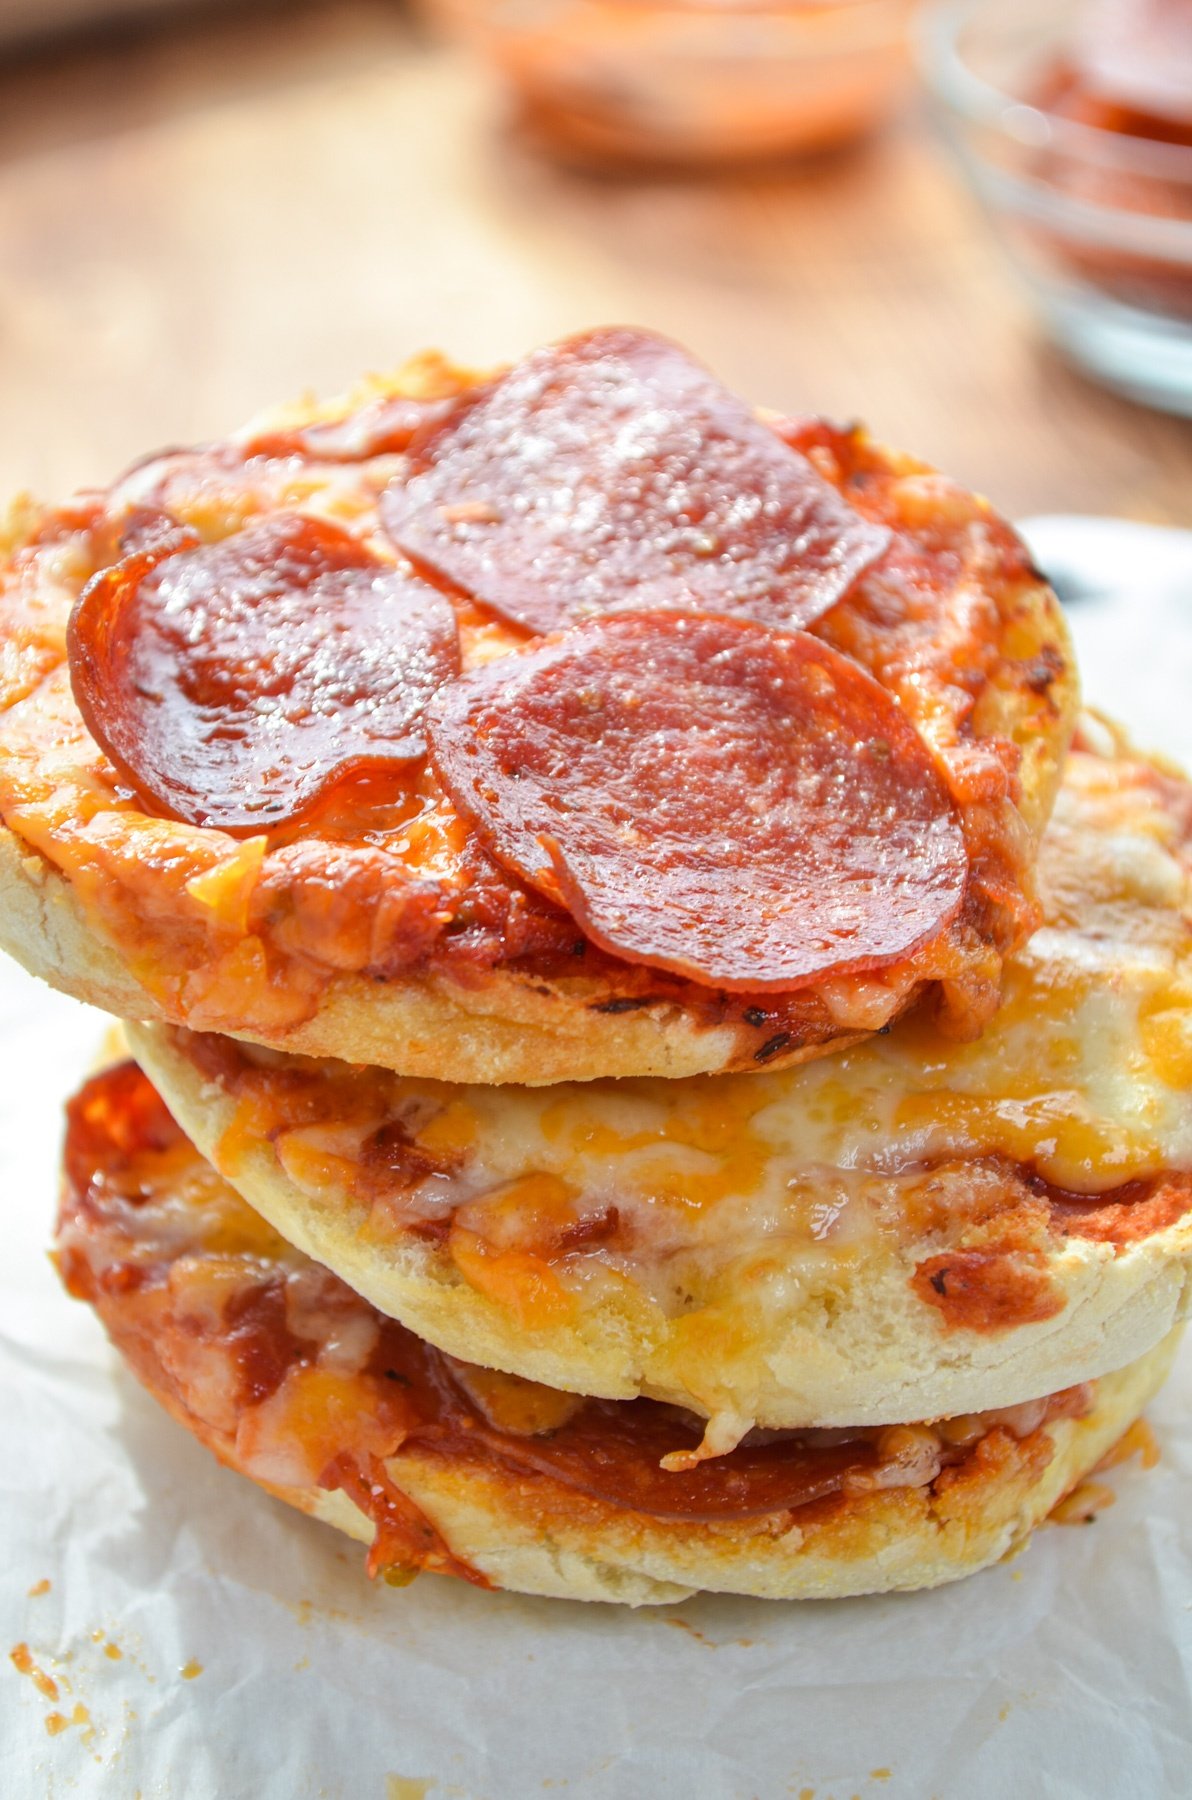 A stack of three english muffin pizzas.